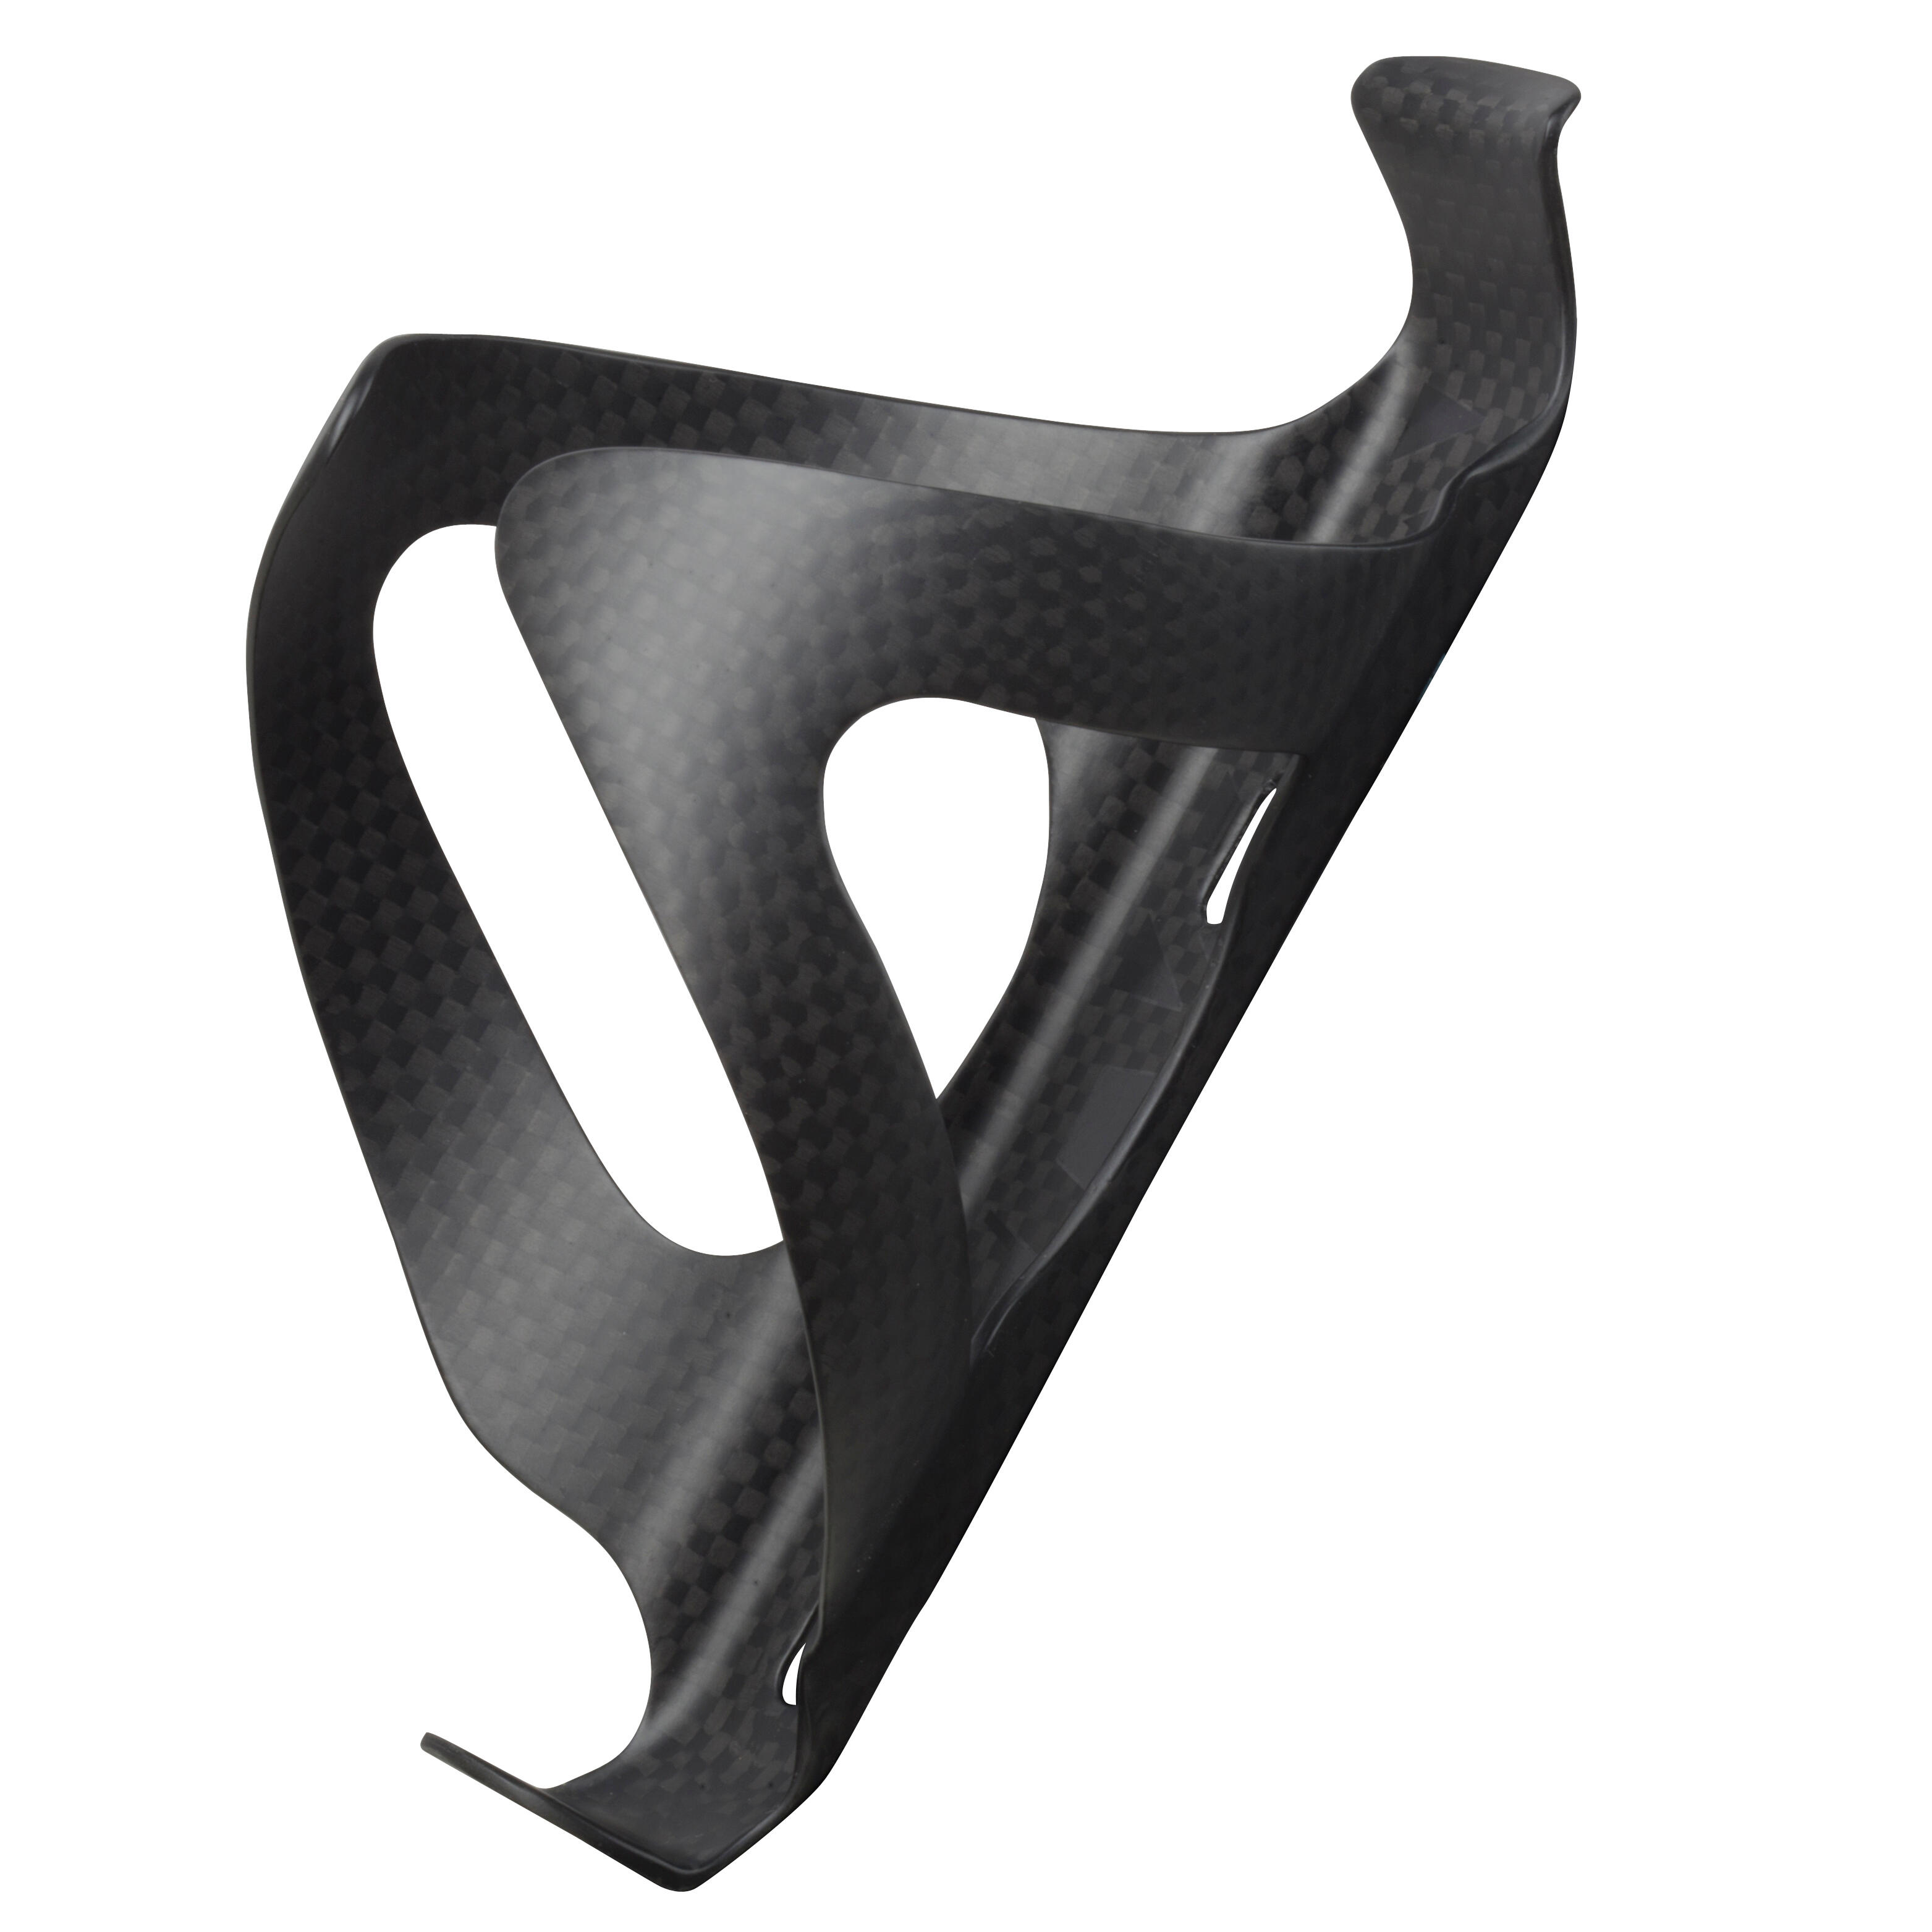 btwin bottle cage